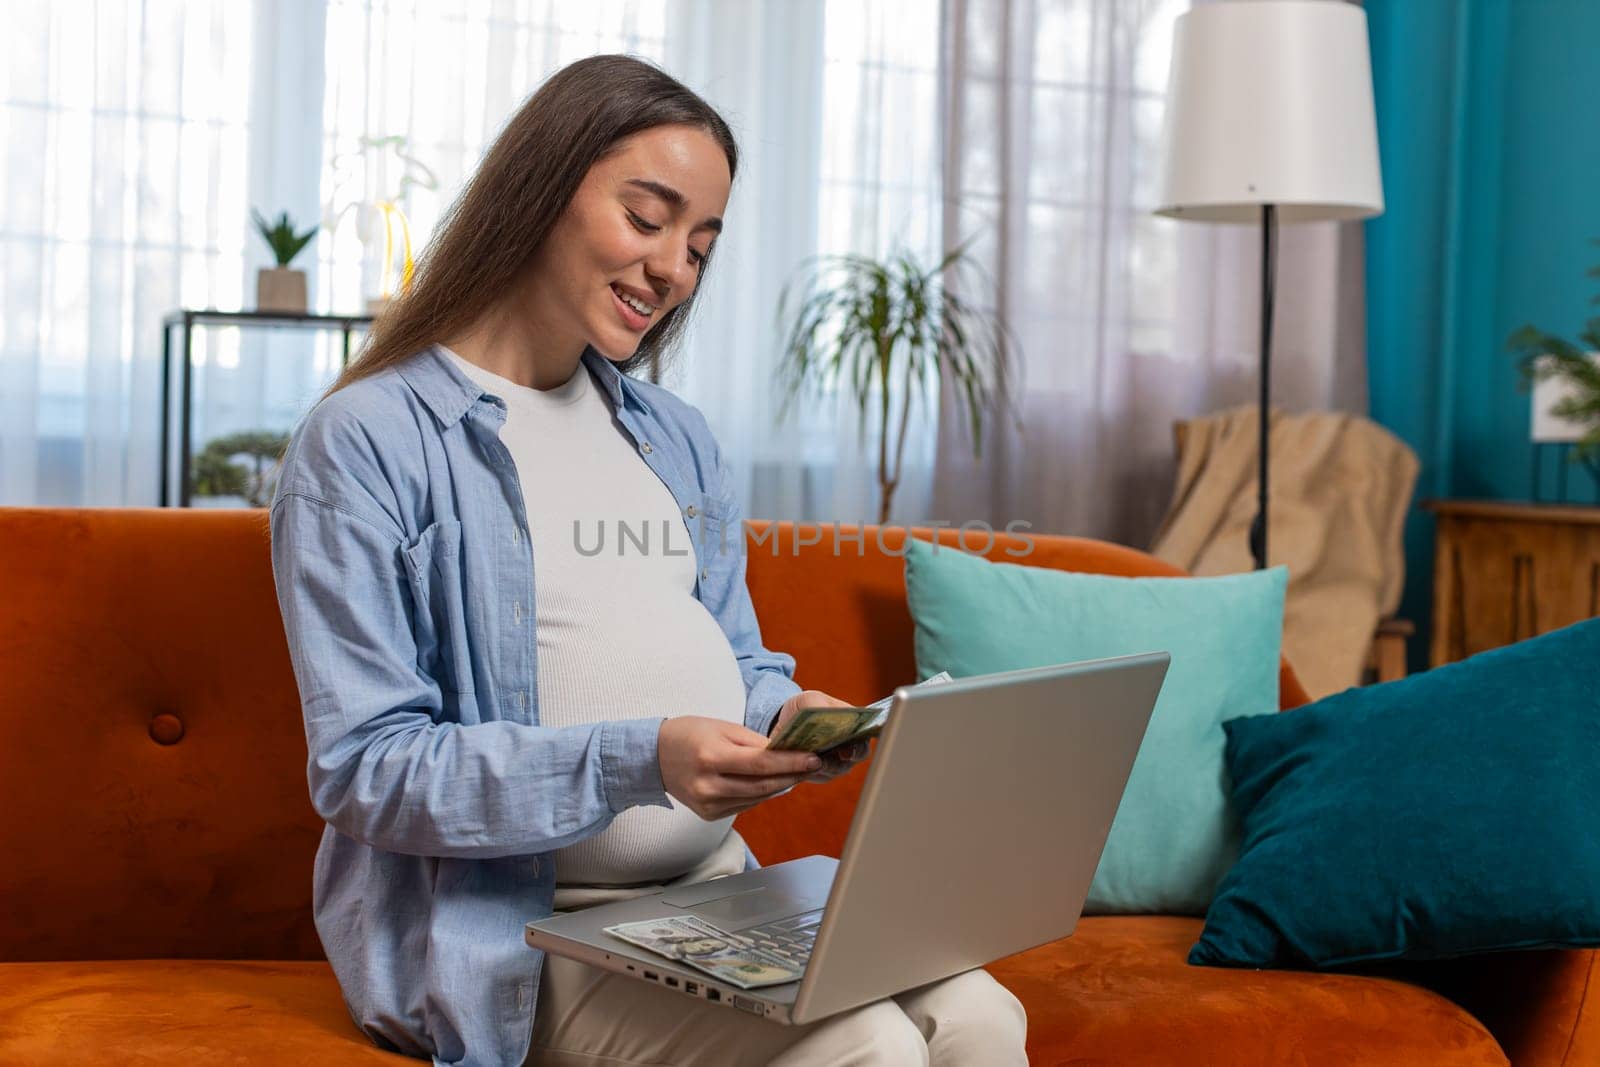 Happy pregnant woman counting money pressing keyboard keys on laptop smiling. Positive beautiful Caucasian expectant lady sitting on sofa couch buying online at home indoors. Comfort and convenience.